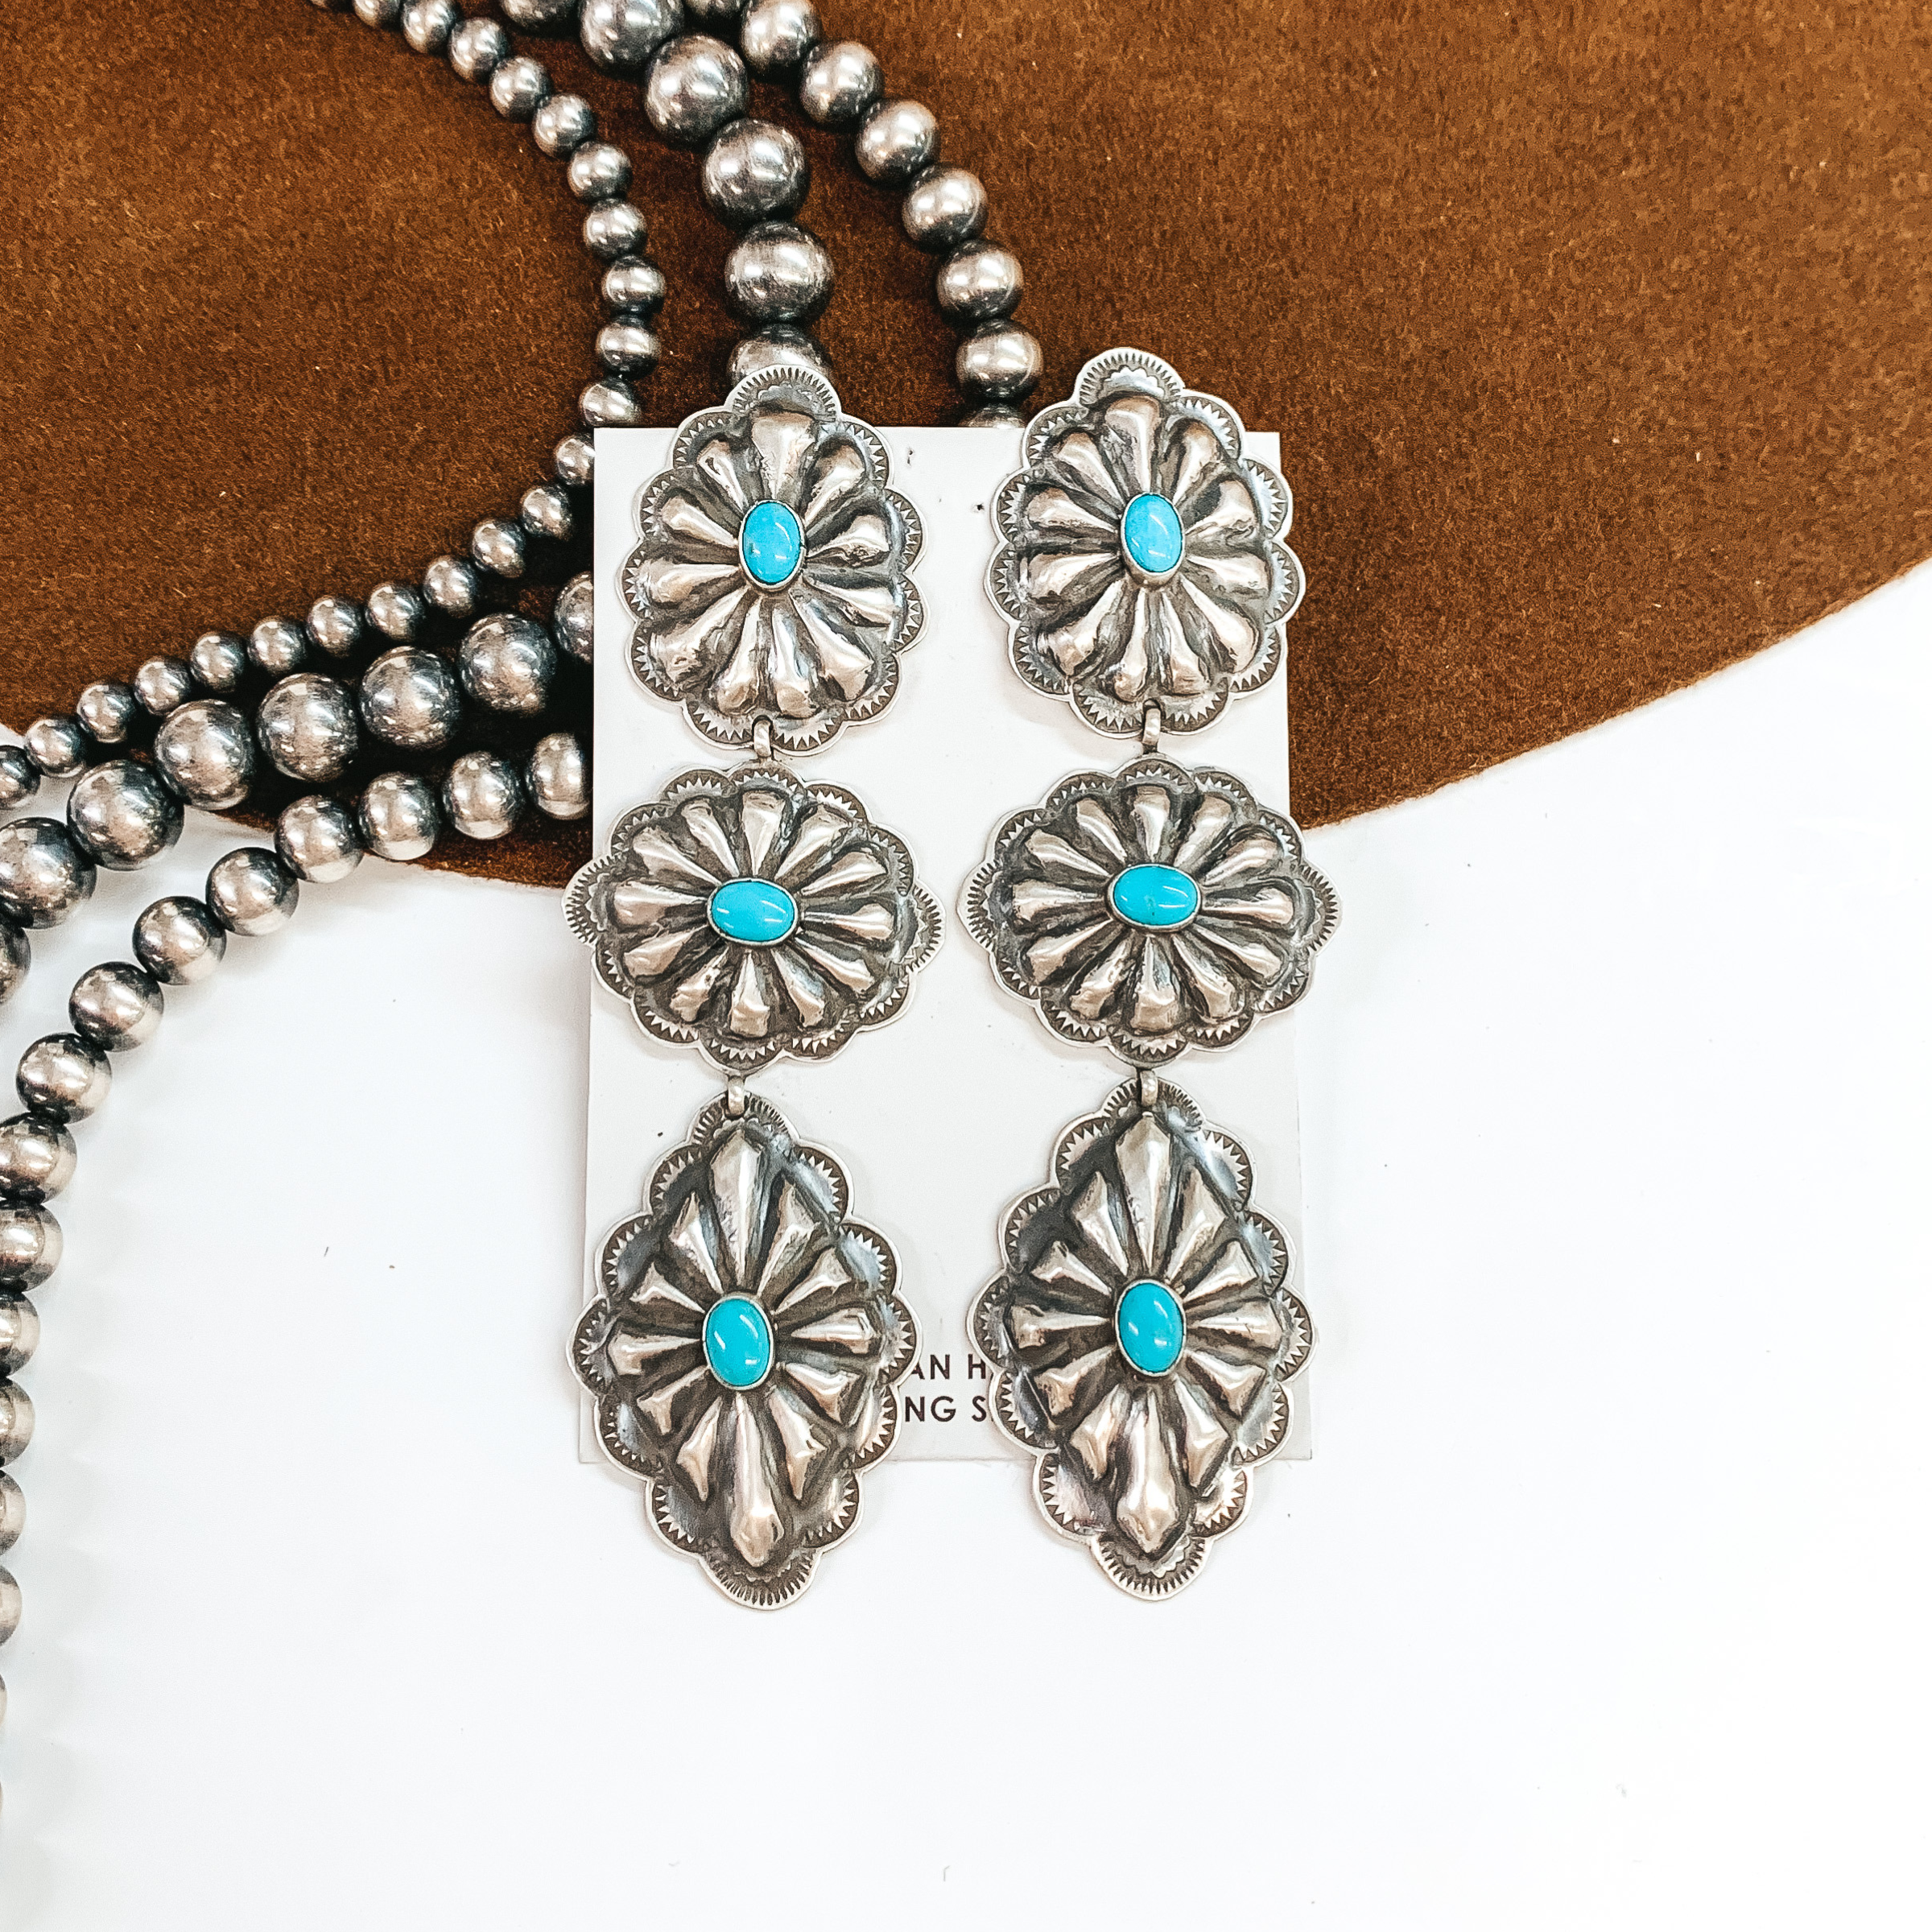 RL Begay | Navajo Handmade Sterling Silver Concho Drop Earrings with Turquoise Stones - Giddy Up Glamour Boutique